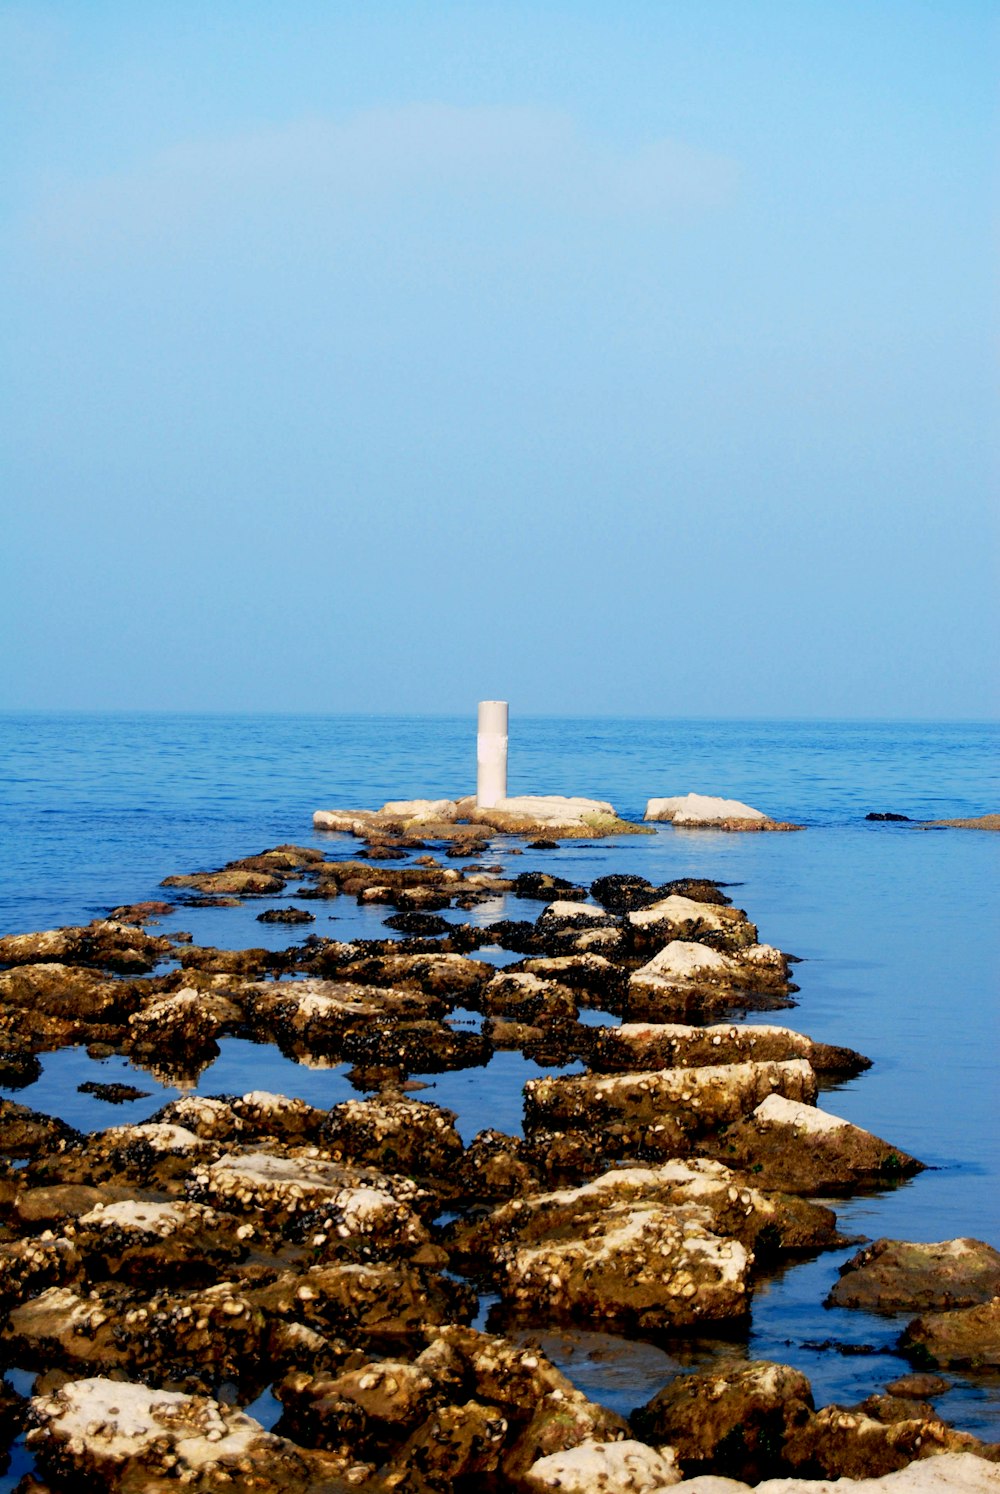 a lighthouse on the edge of a body of water